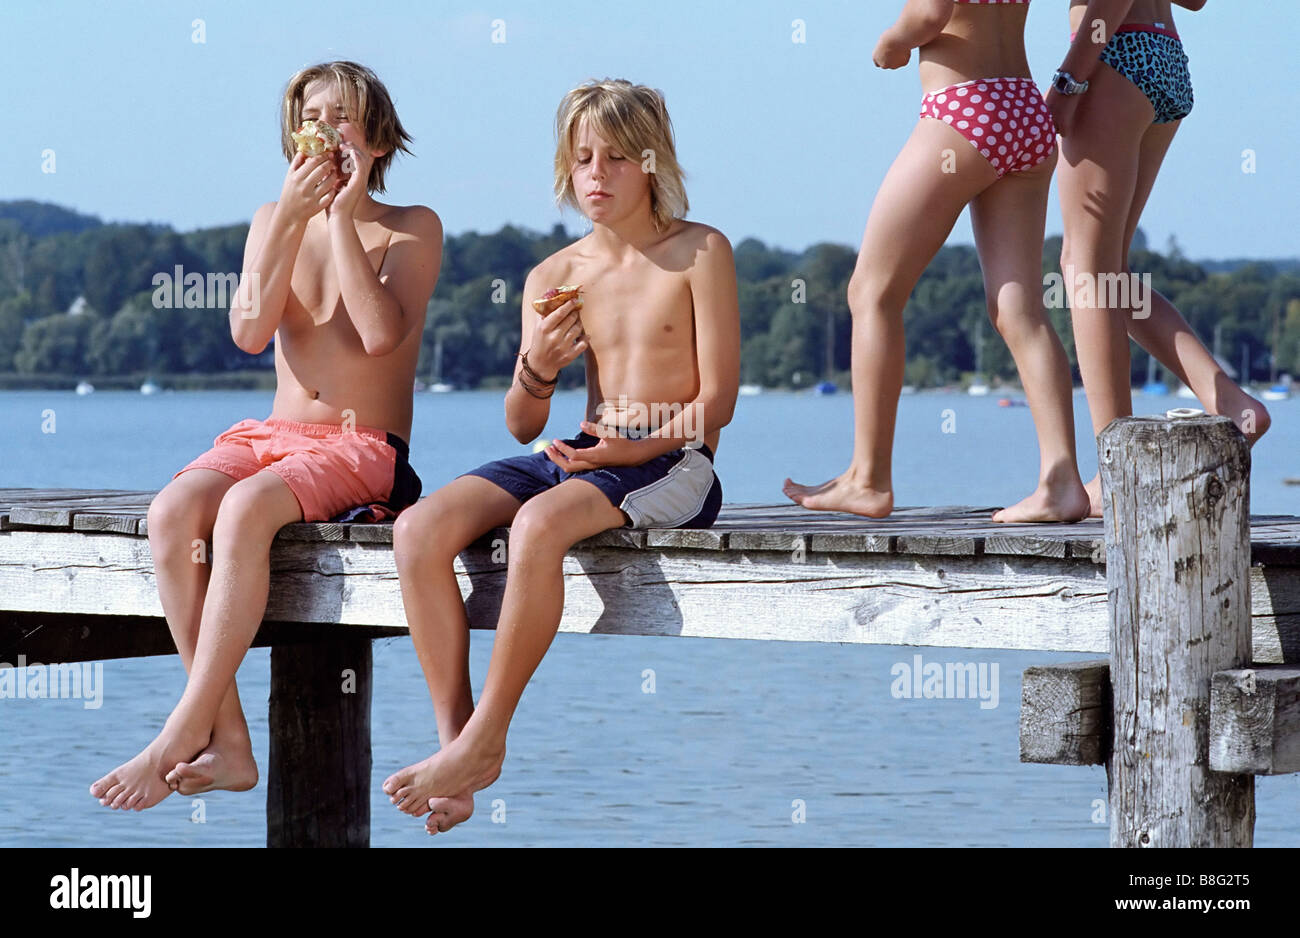 Two Boys with naked Torso eating Bread while two Girls in Bikini walk by -  Snack - Leisure Time - Friendship - Lake Stock Photo - Alamy